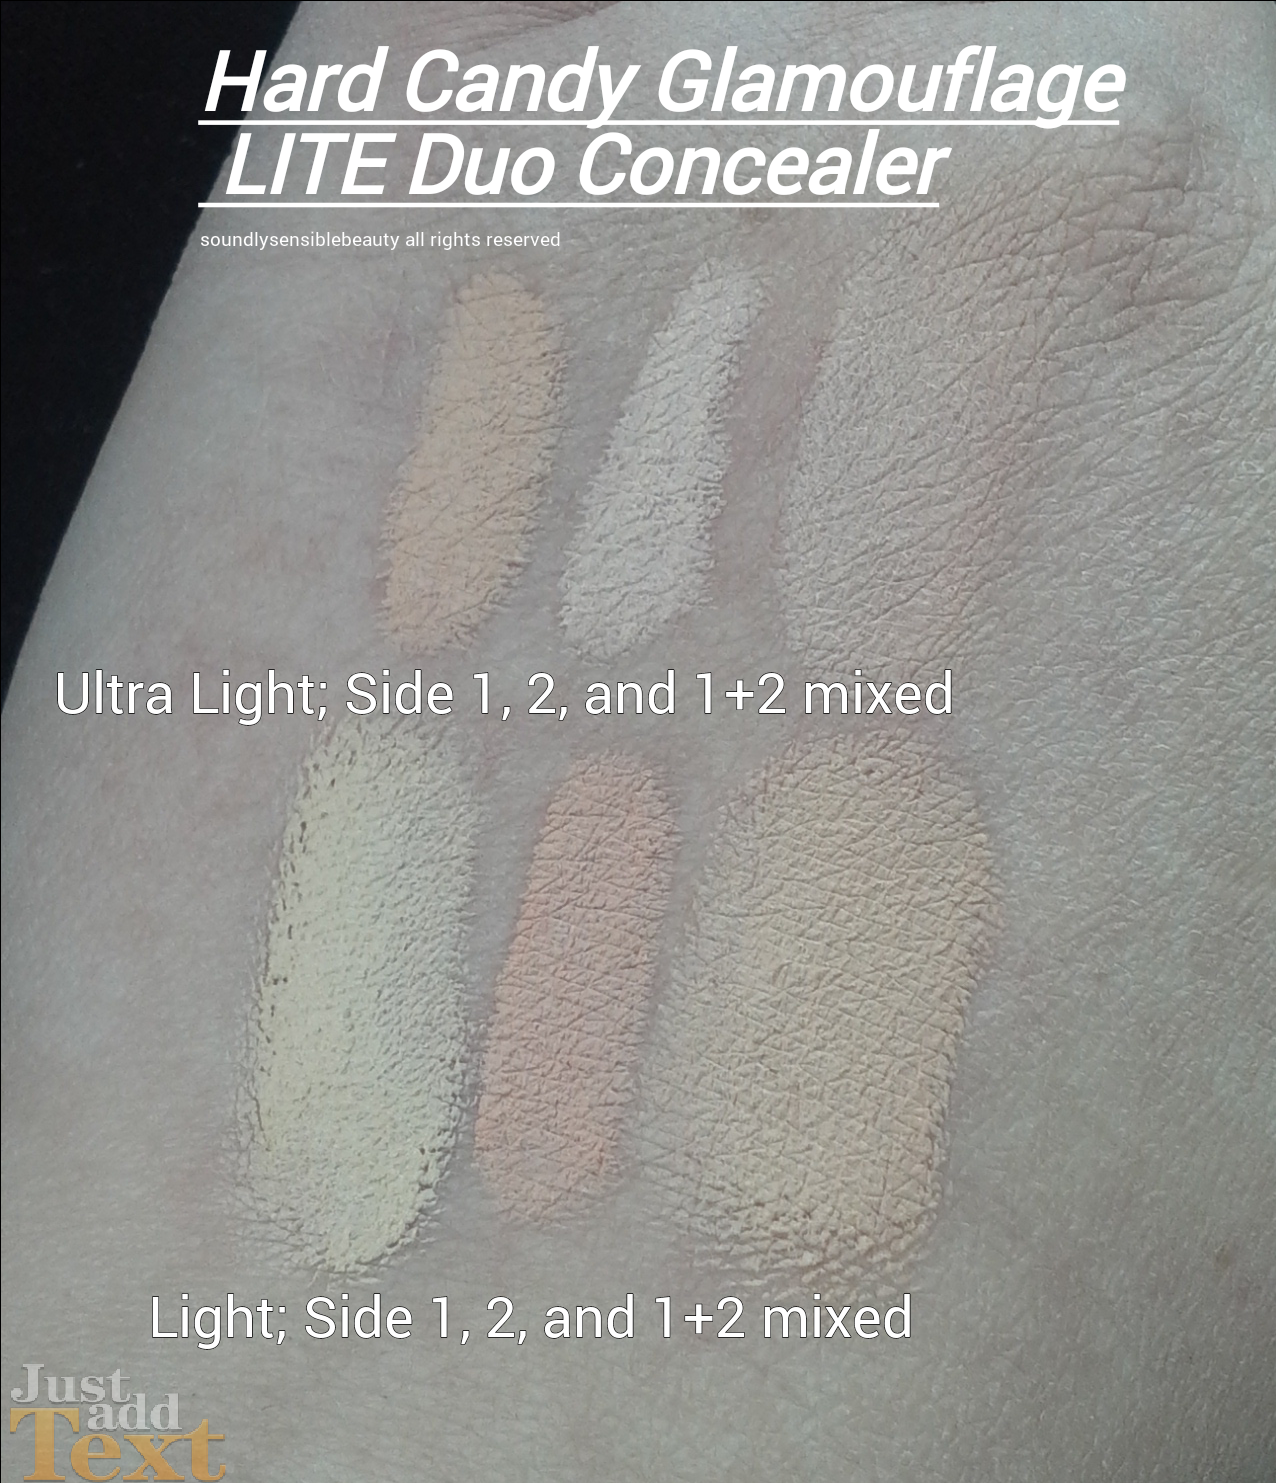 Hard Candy Glamoflauge LITE Concealer Review & Swatches of Shades